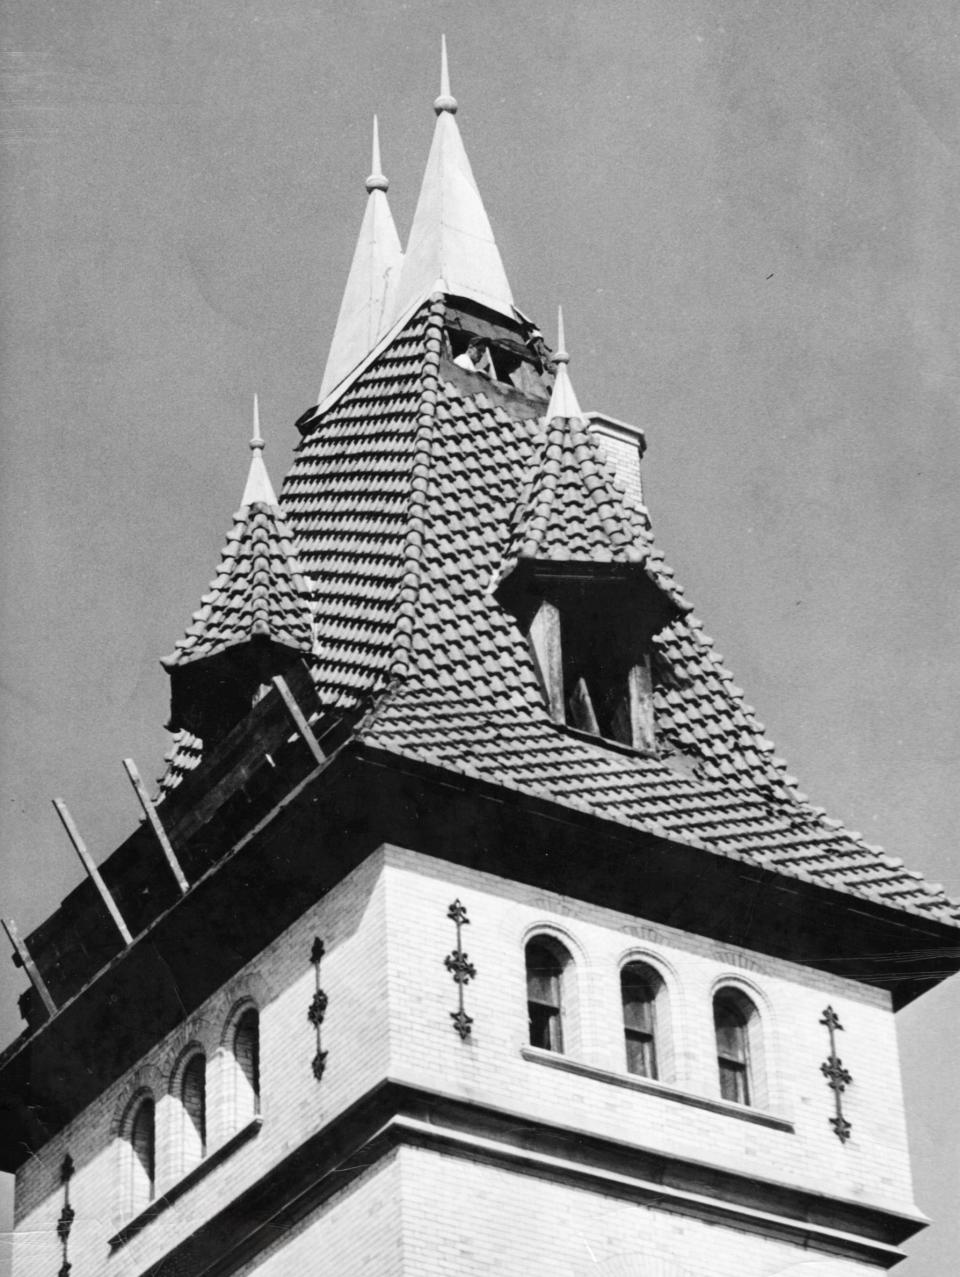 The Munson-Williams Memorial building was razed in 1959, but many still remember the touch of grandeur it gave downtown Utica. It stood on a triangular plot boarded by John and Elizabeth streets and Park Avenue. Its ornate red-tiled roof is shown here.